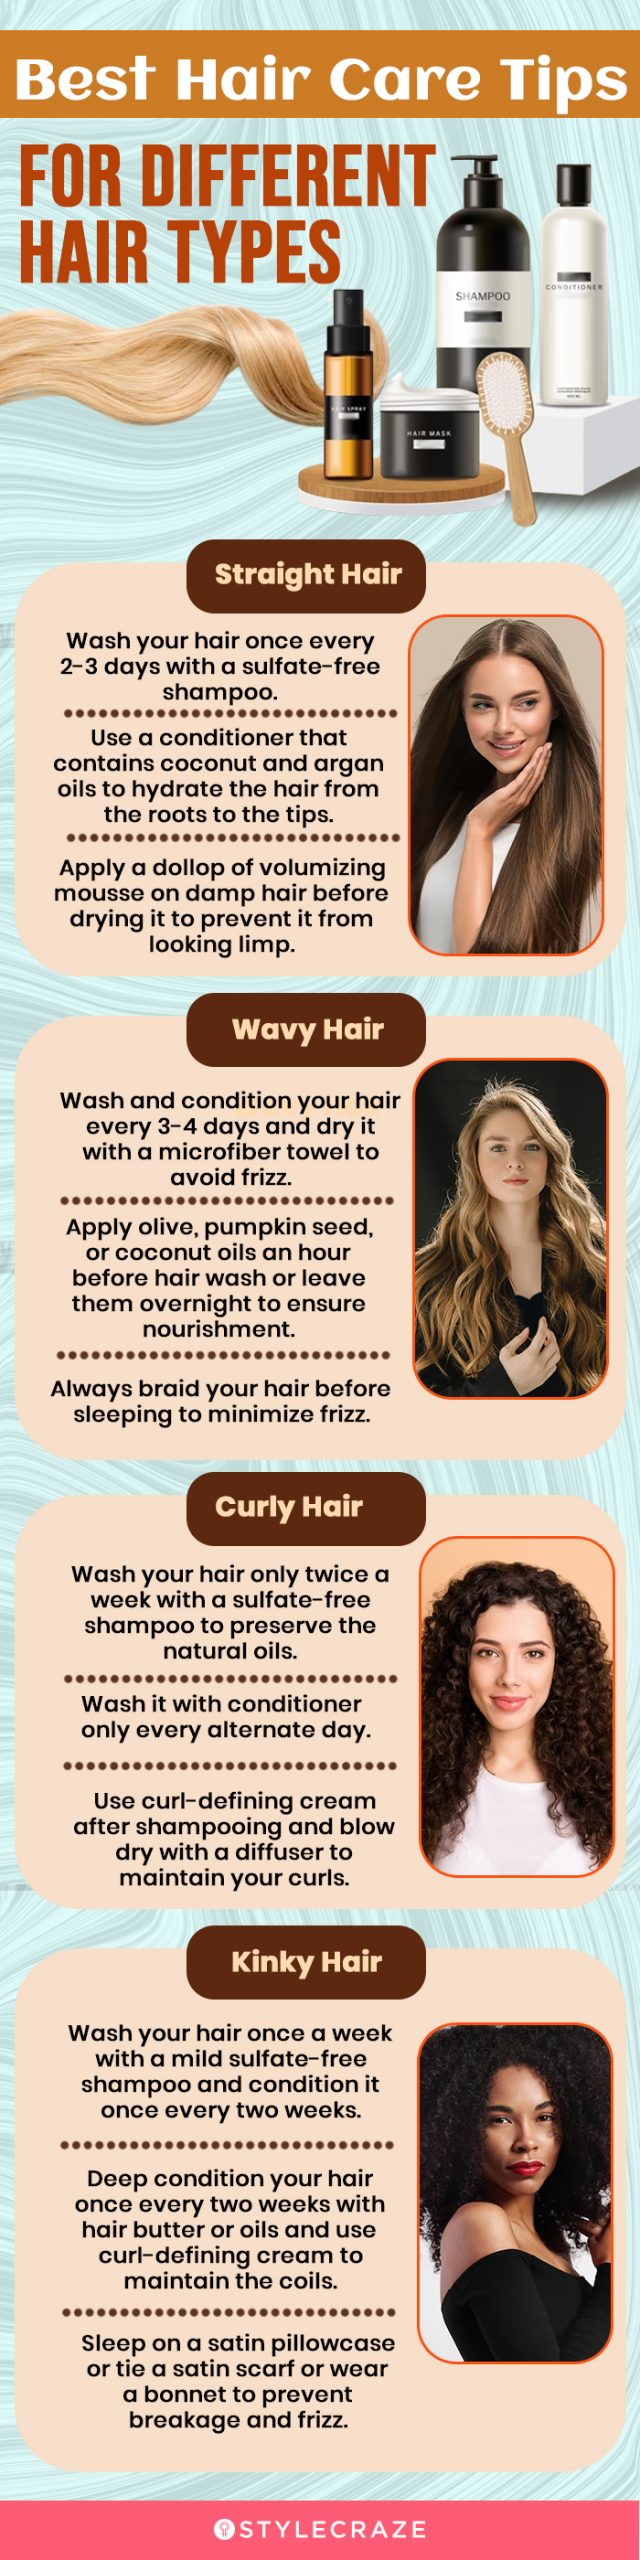 Best Wavy Hair Products to Use & What to Avoid | Prose Hair